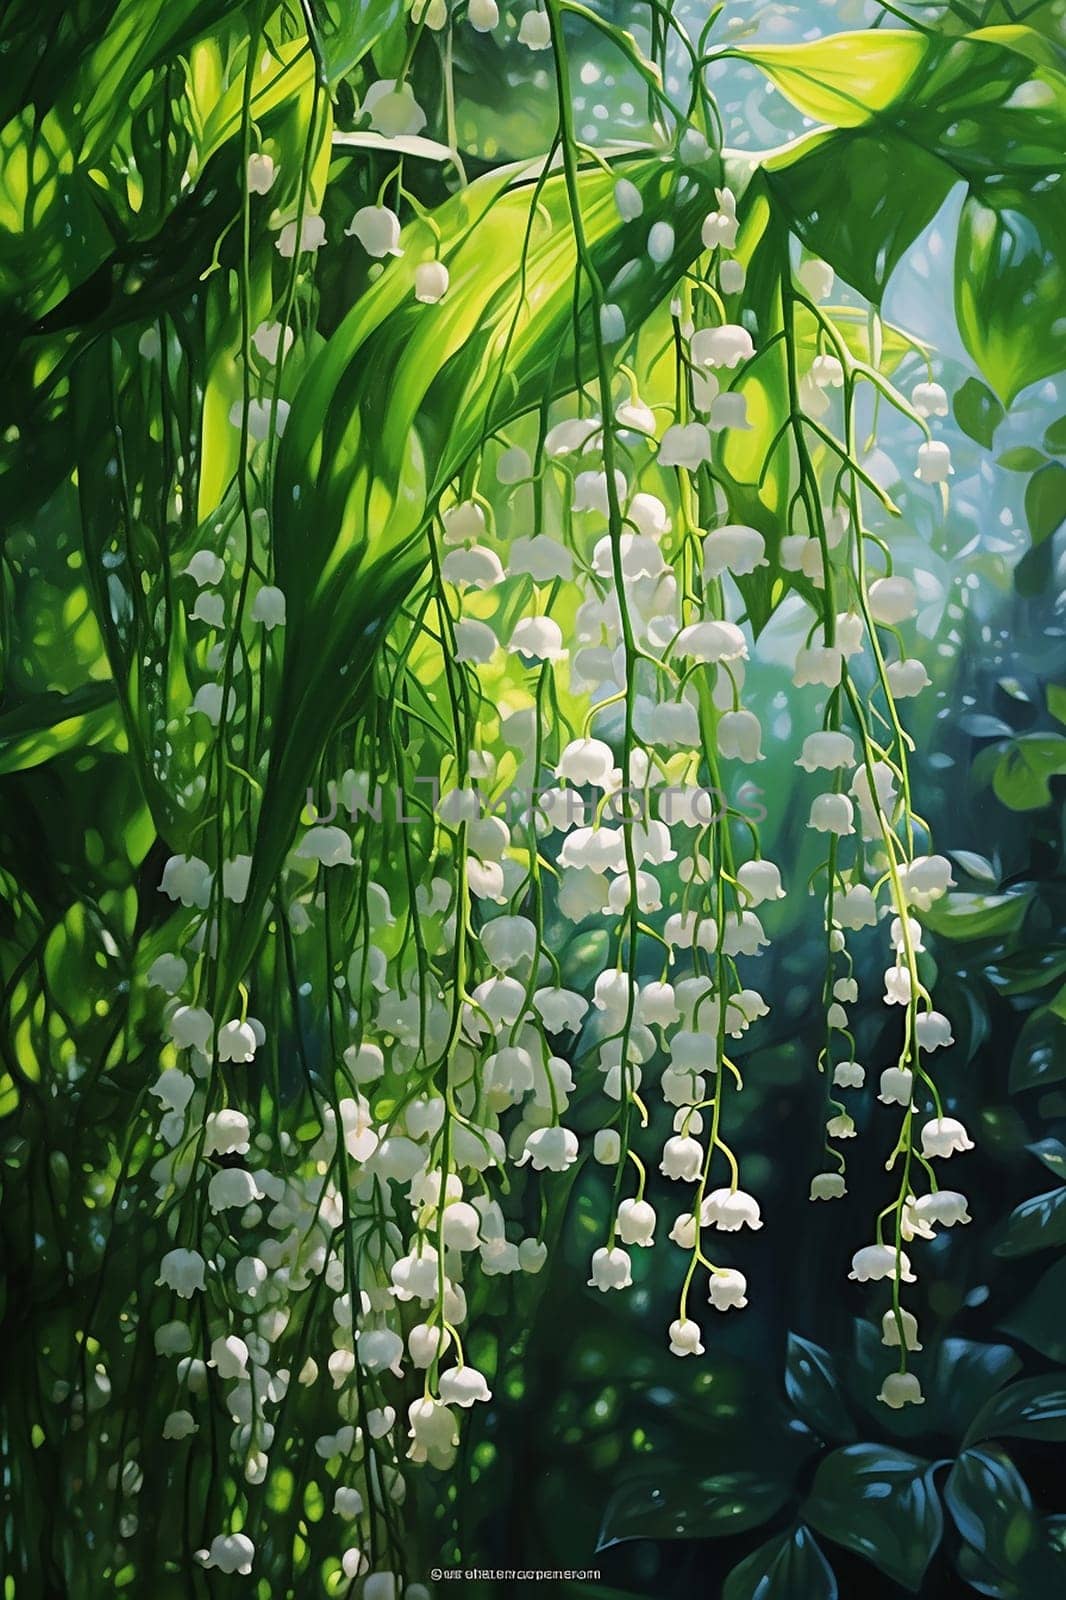 Delicate white flowers hanging amongst lush green foliage bathed in dappled sunlight. by Hype2art